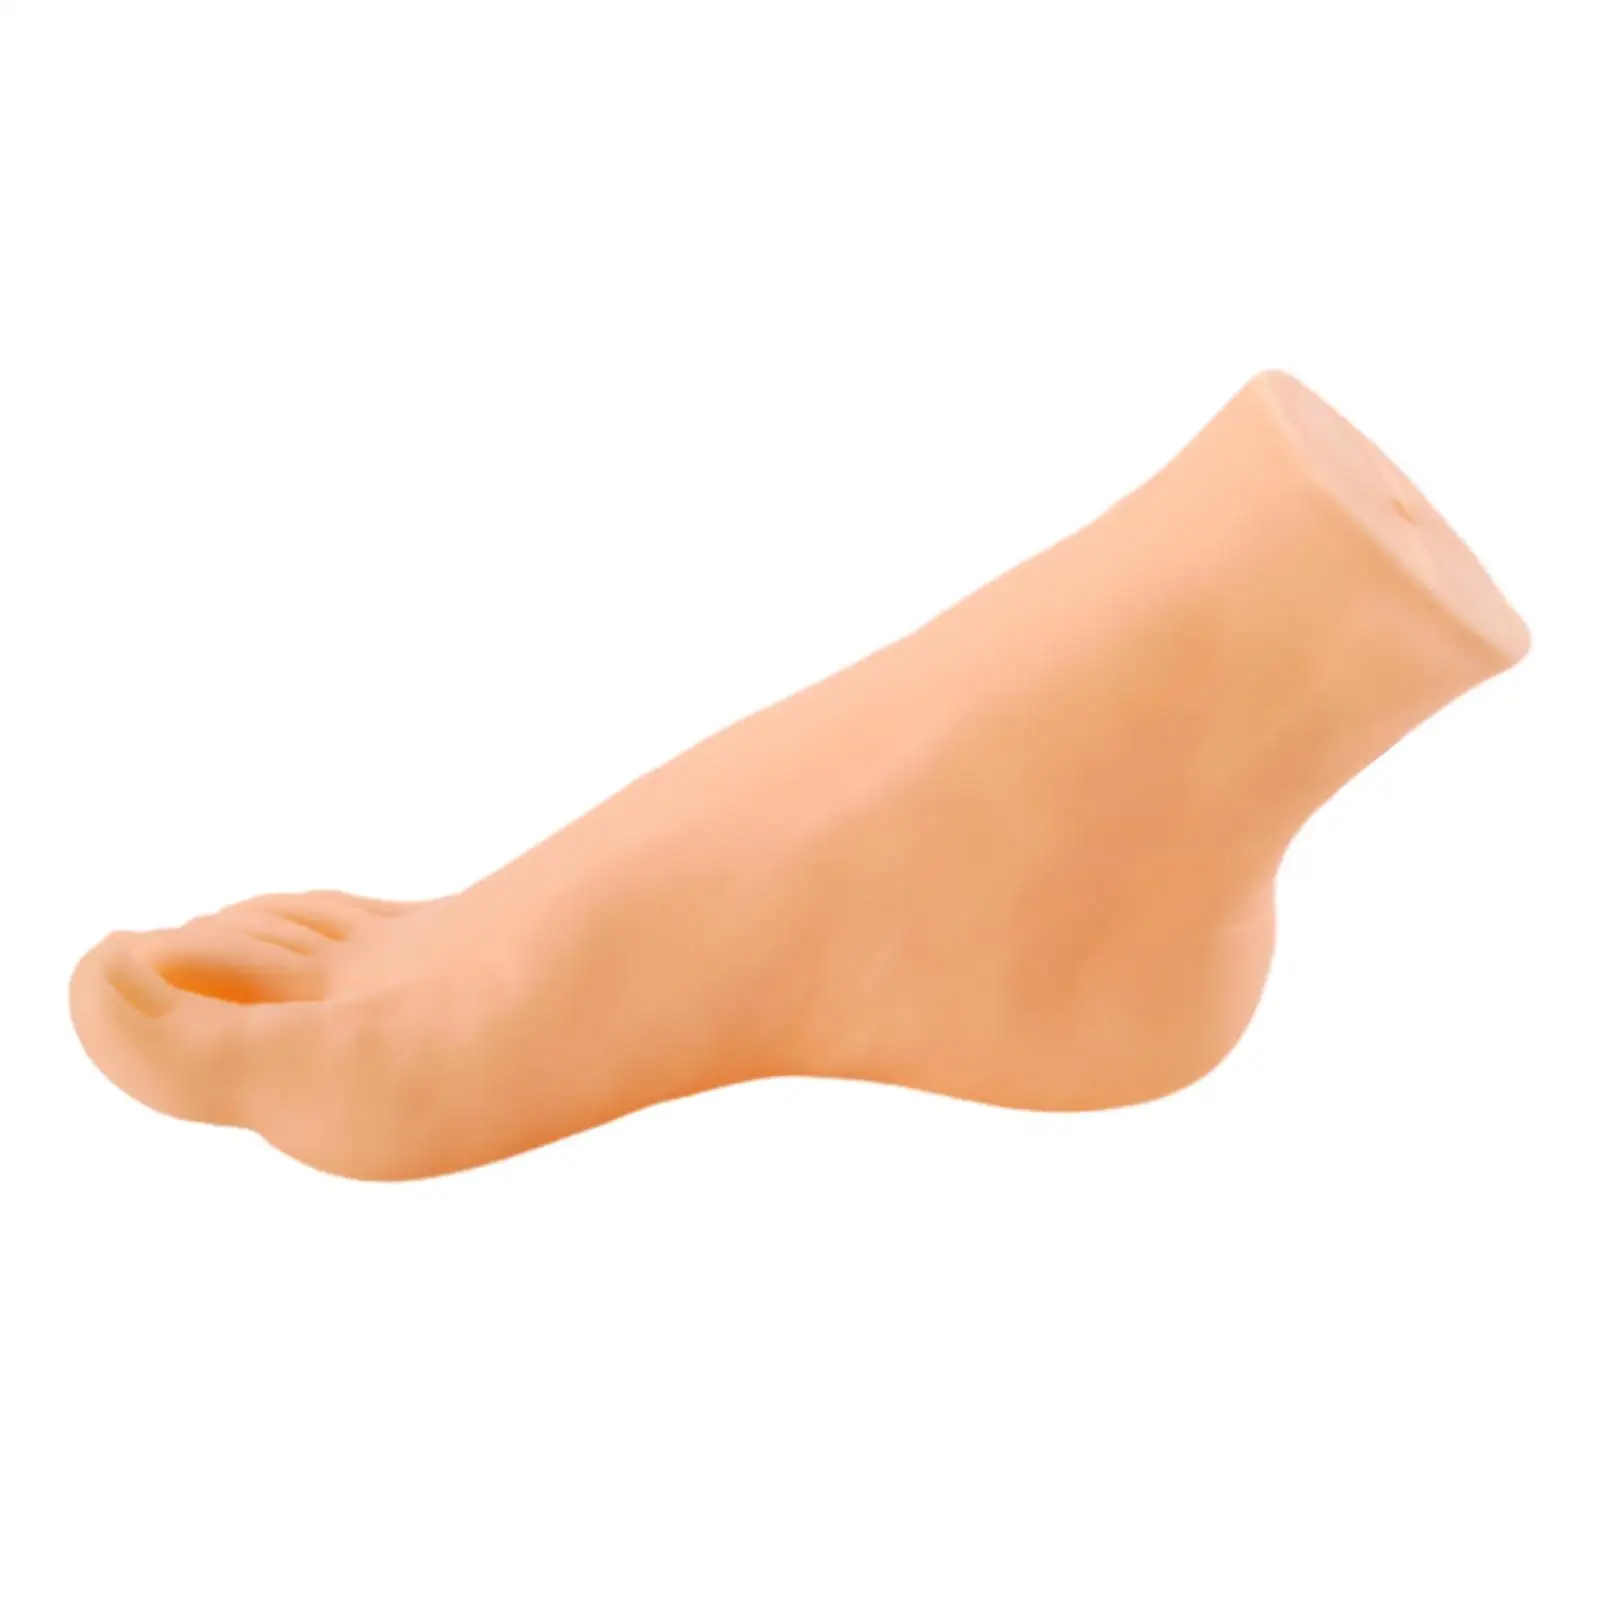 Foot Model Stand Tools Shoes Display Props Durable Mannequin Foot Display Simulation for Shop Retail Short Stocking Display